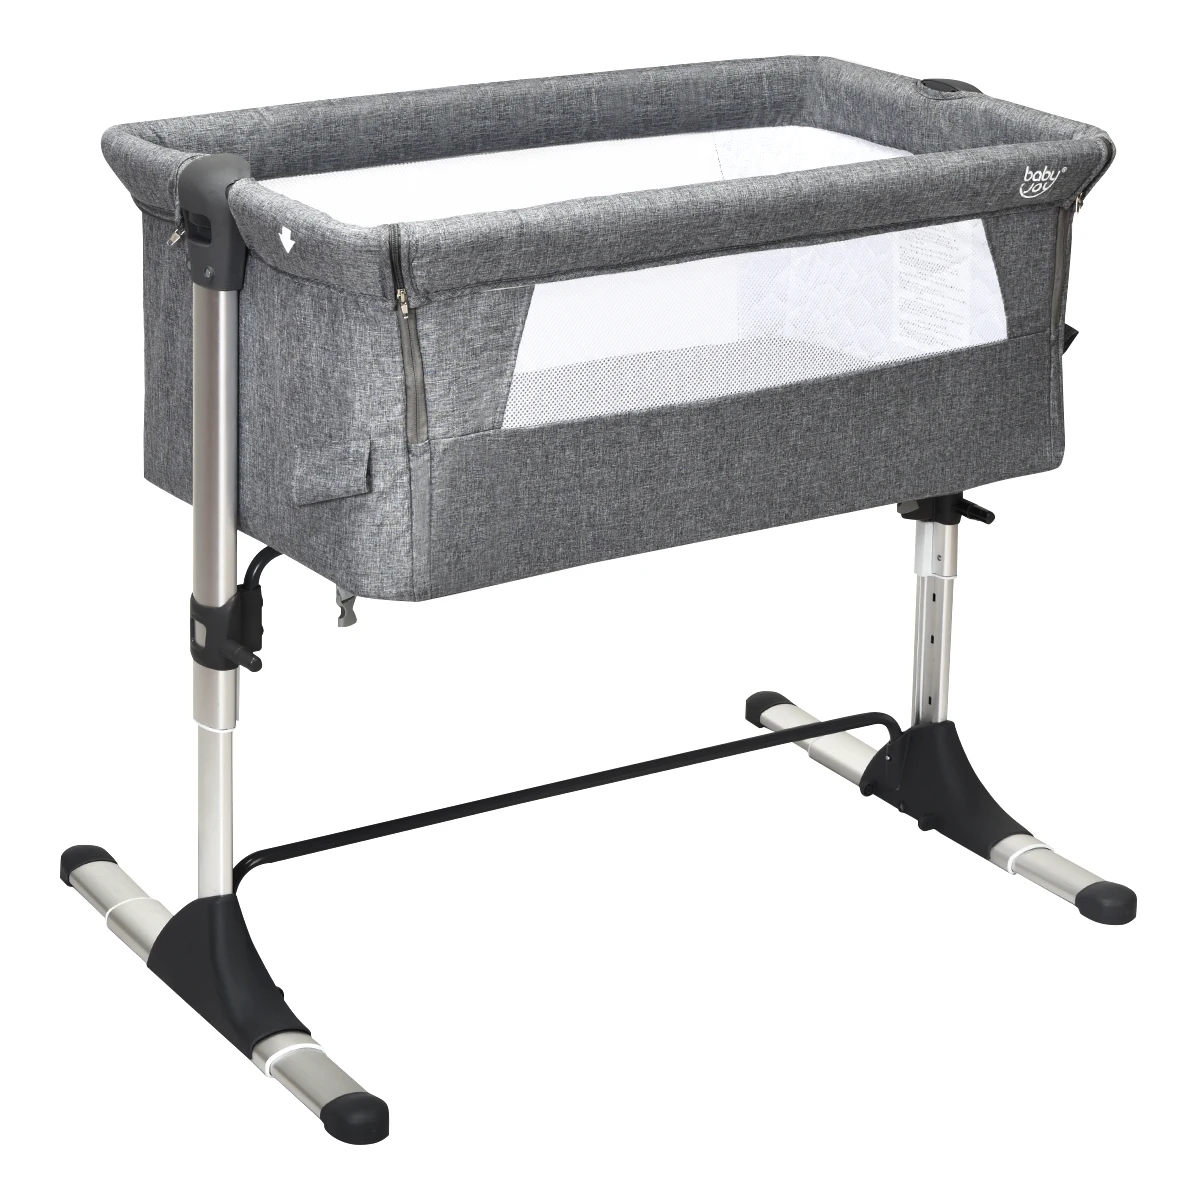 Portable Baby Bed Side Sleeper Infant Home Bassinet Crib W/Carrying Bag Grey